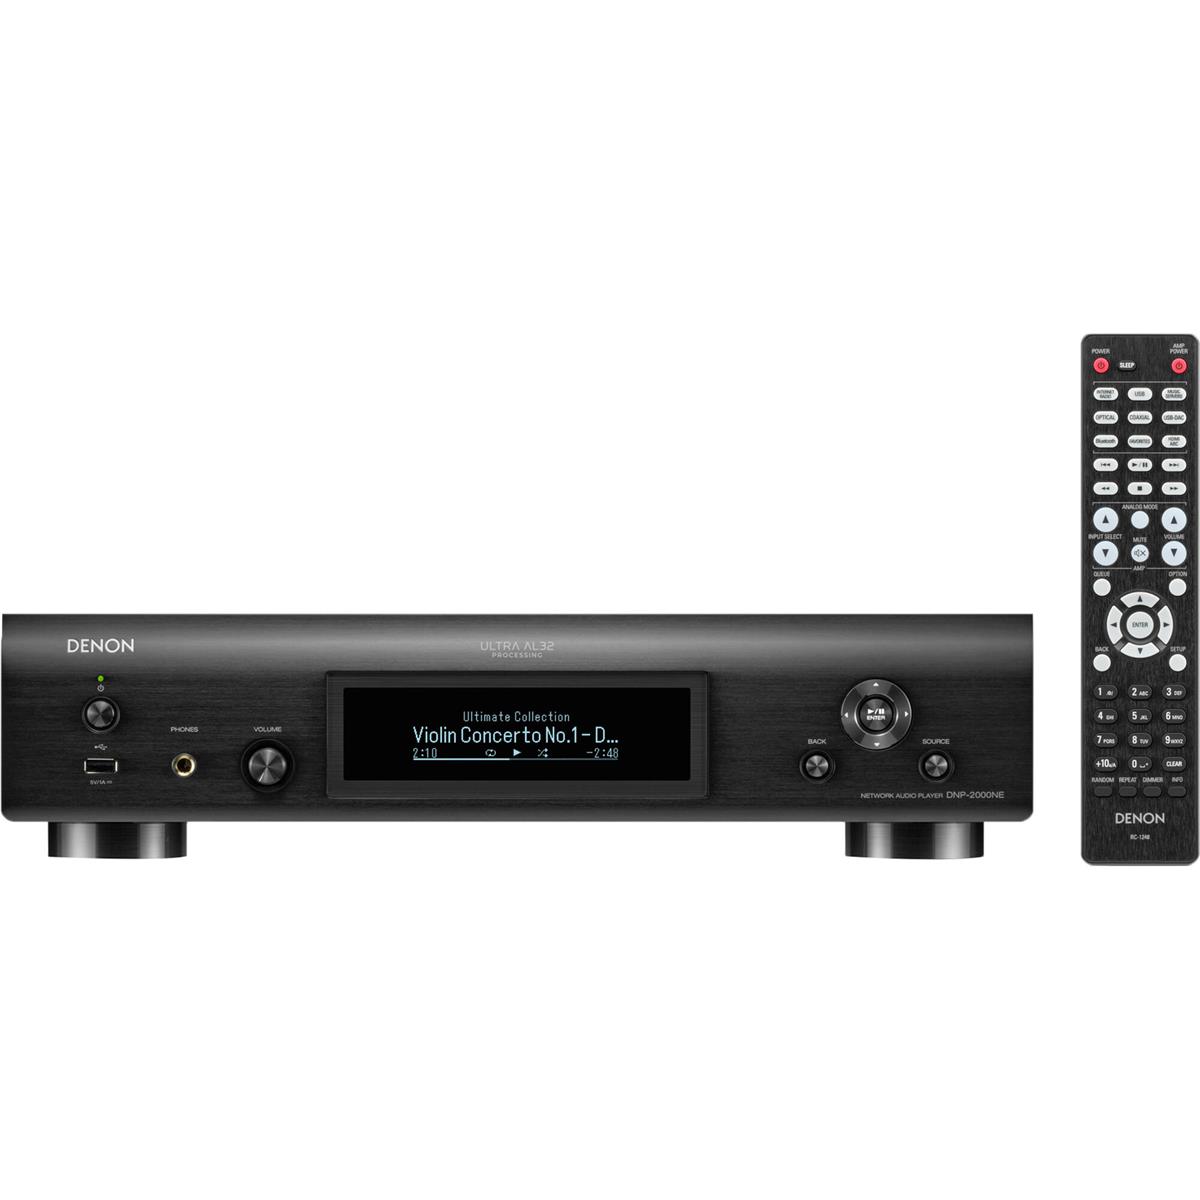 Image of Denon DNP-2000NE Network Audio Streamer with HEOS and Ultra AL32 Processing